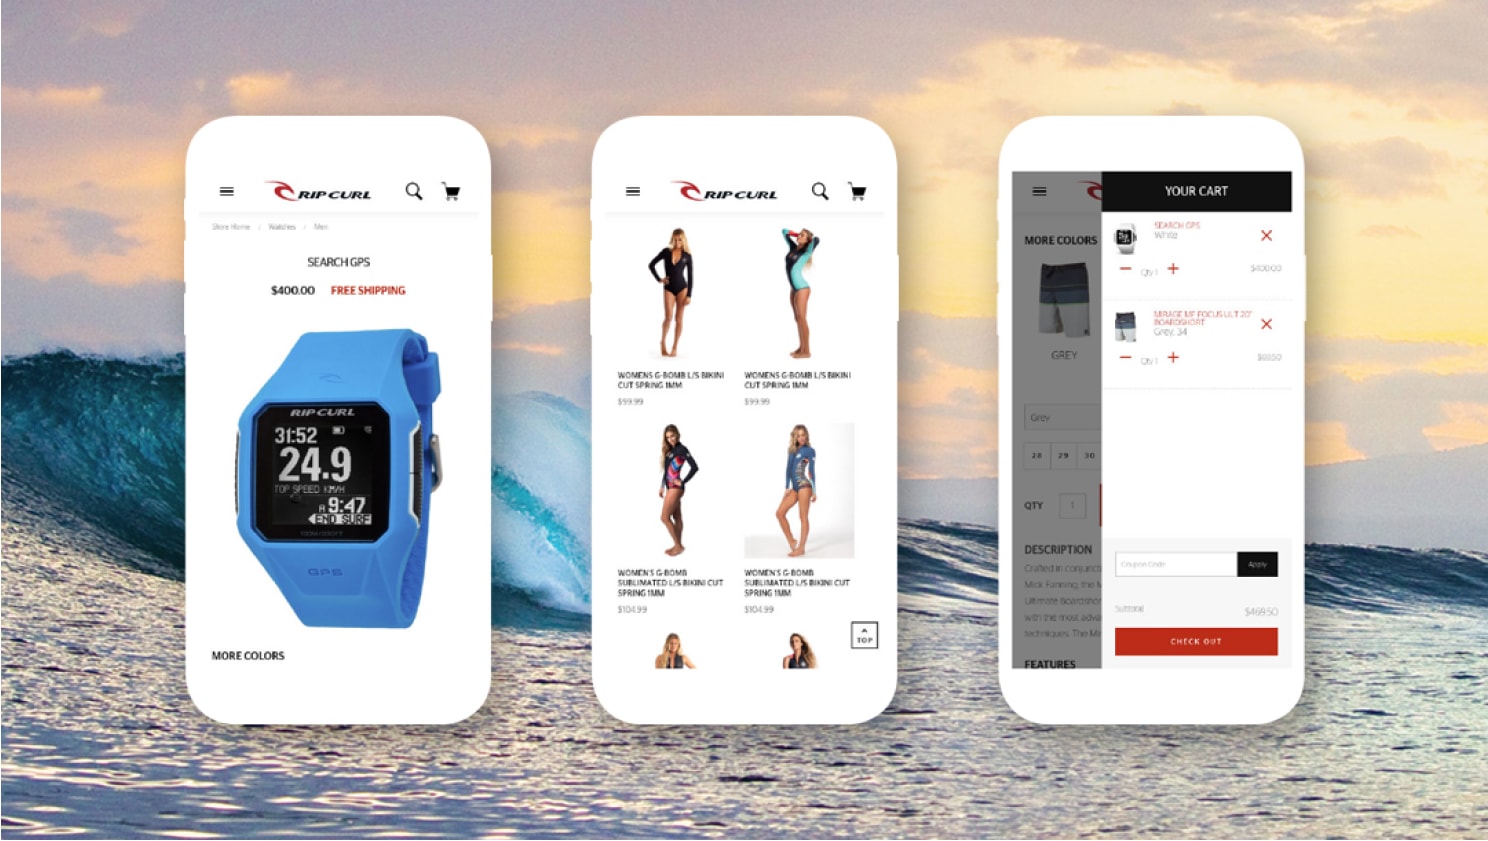 eCommerce and UX Design Phone App Example